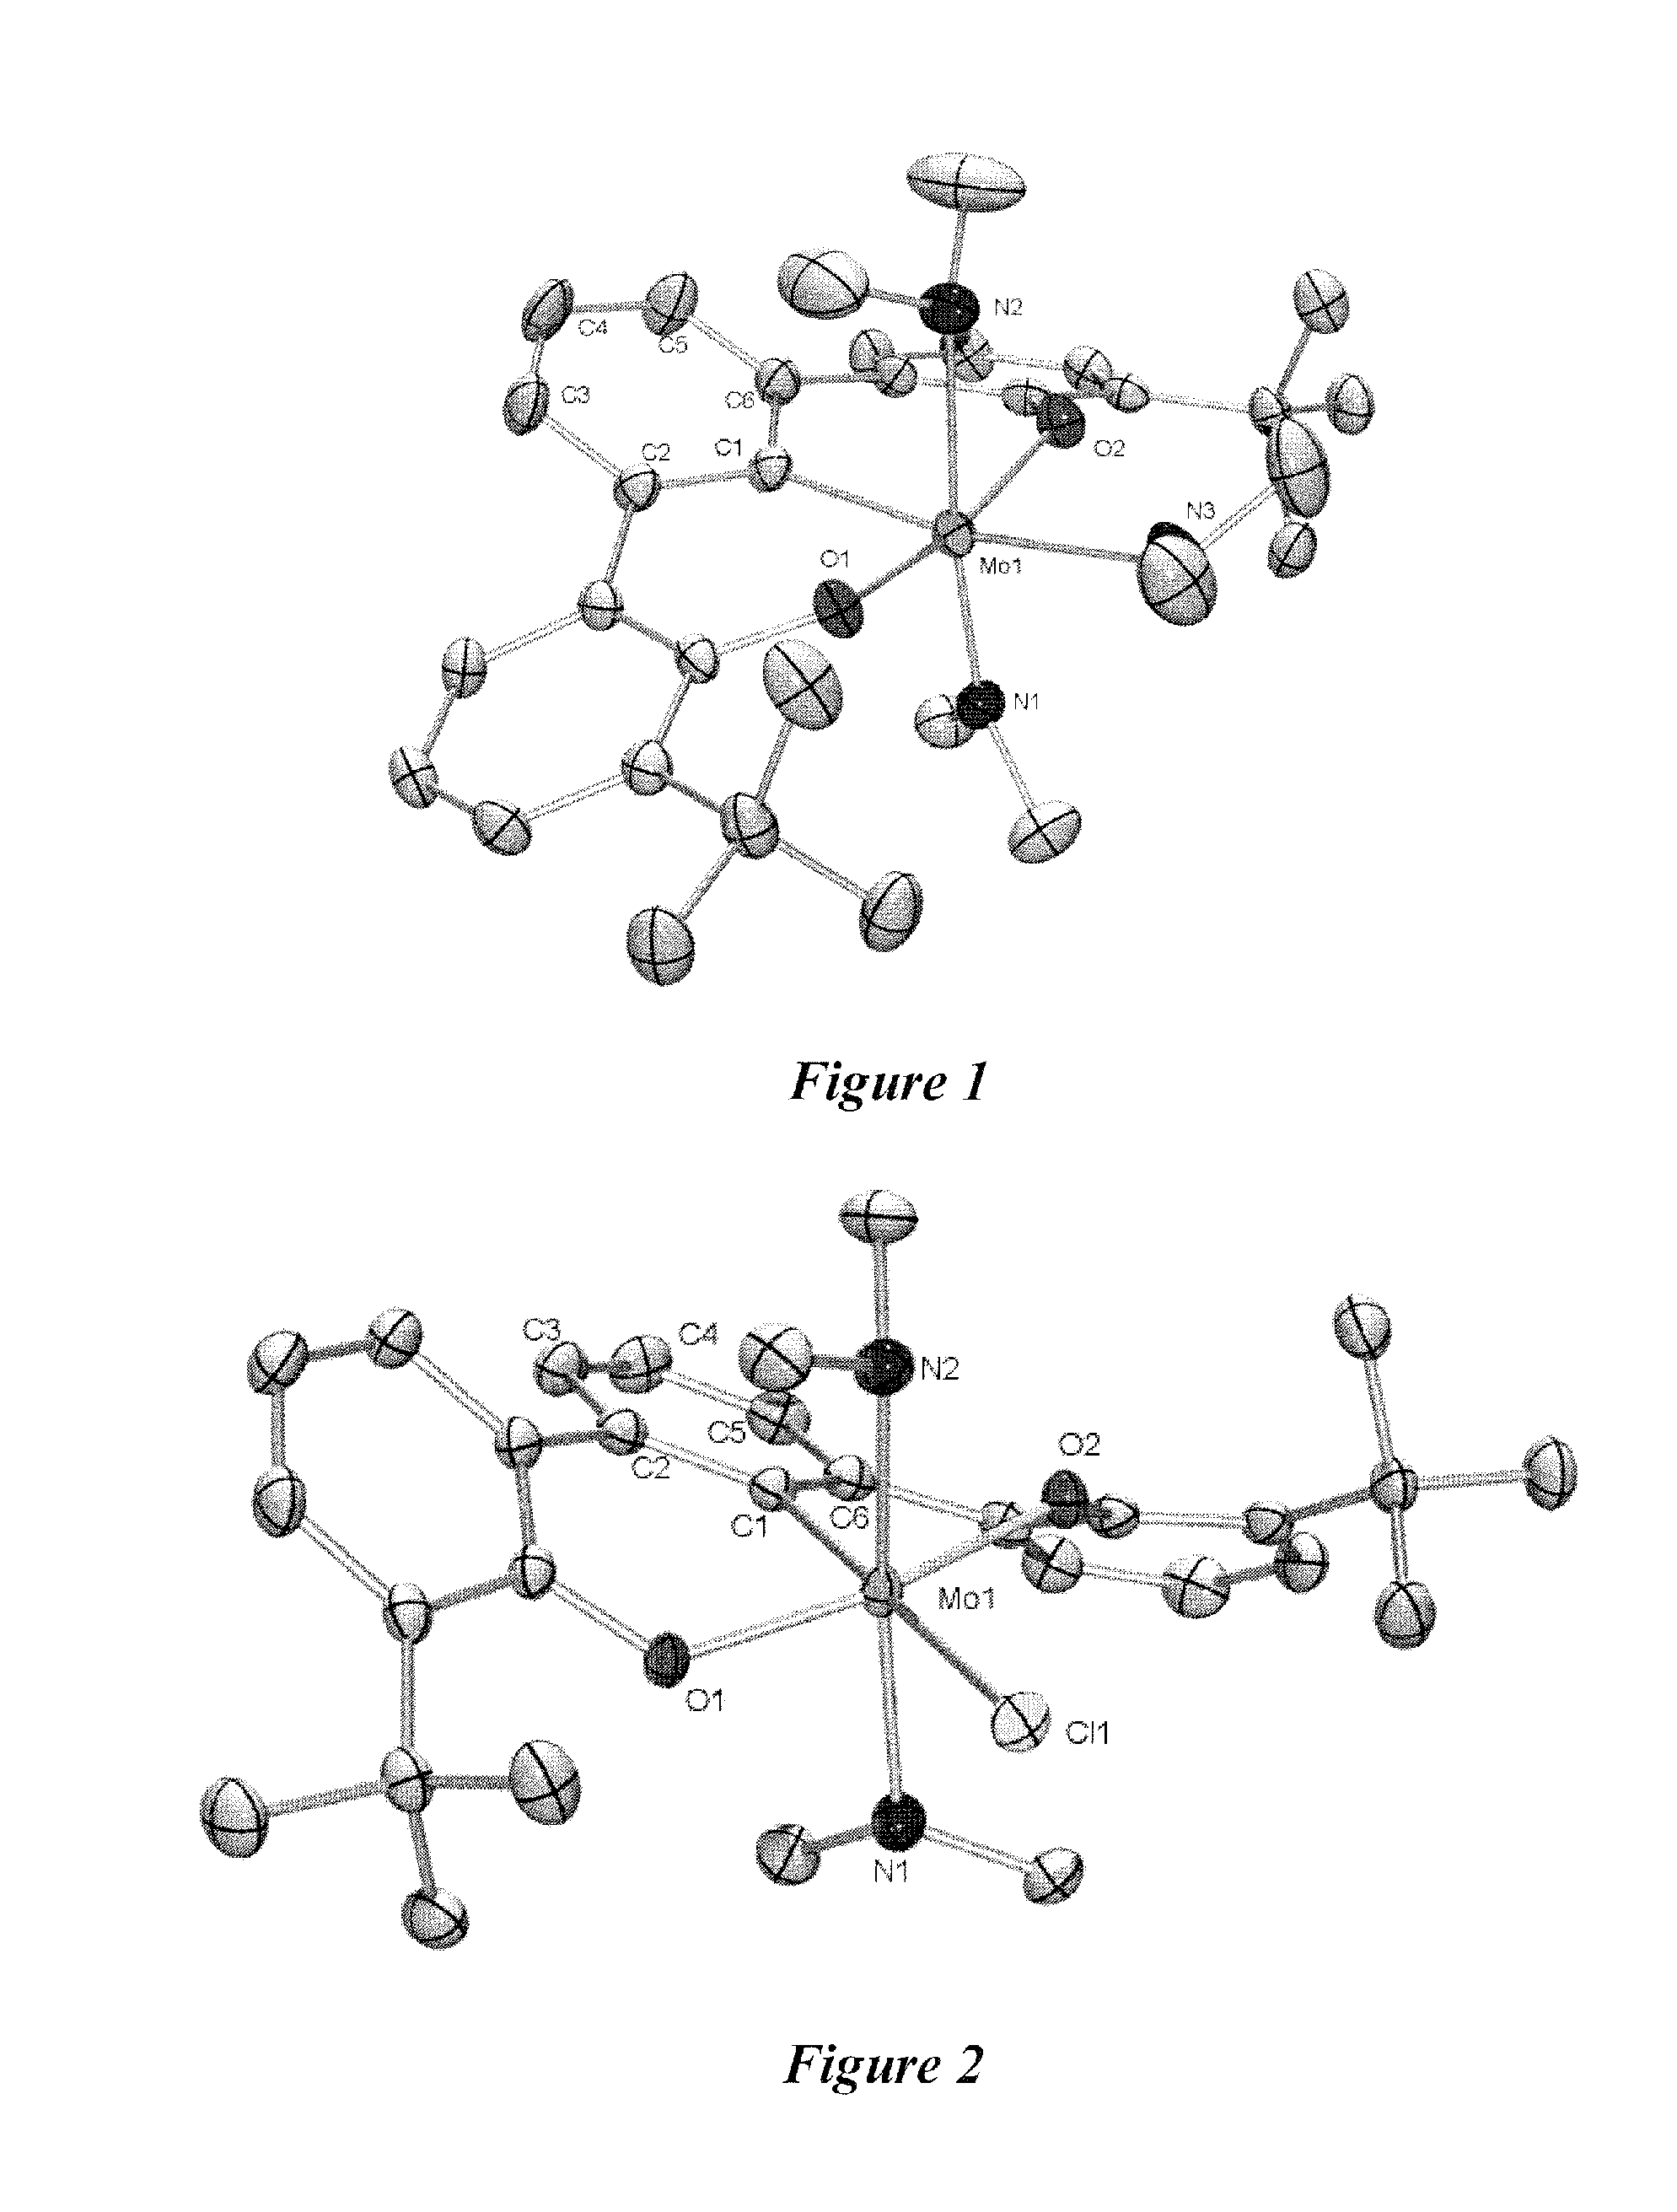 Method for transferring N-atoms from metal complexes to organic and inorganic substrates